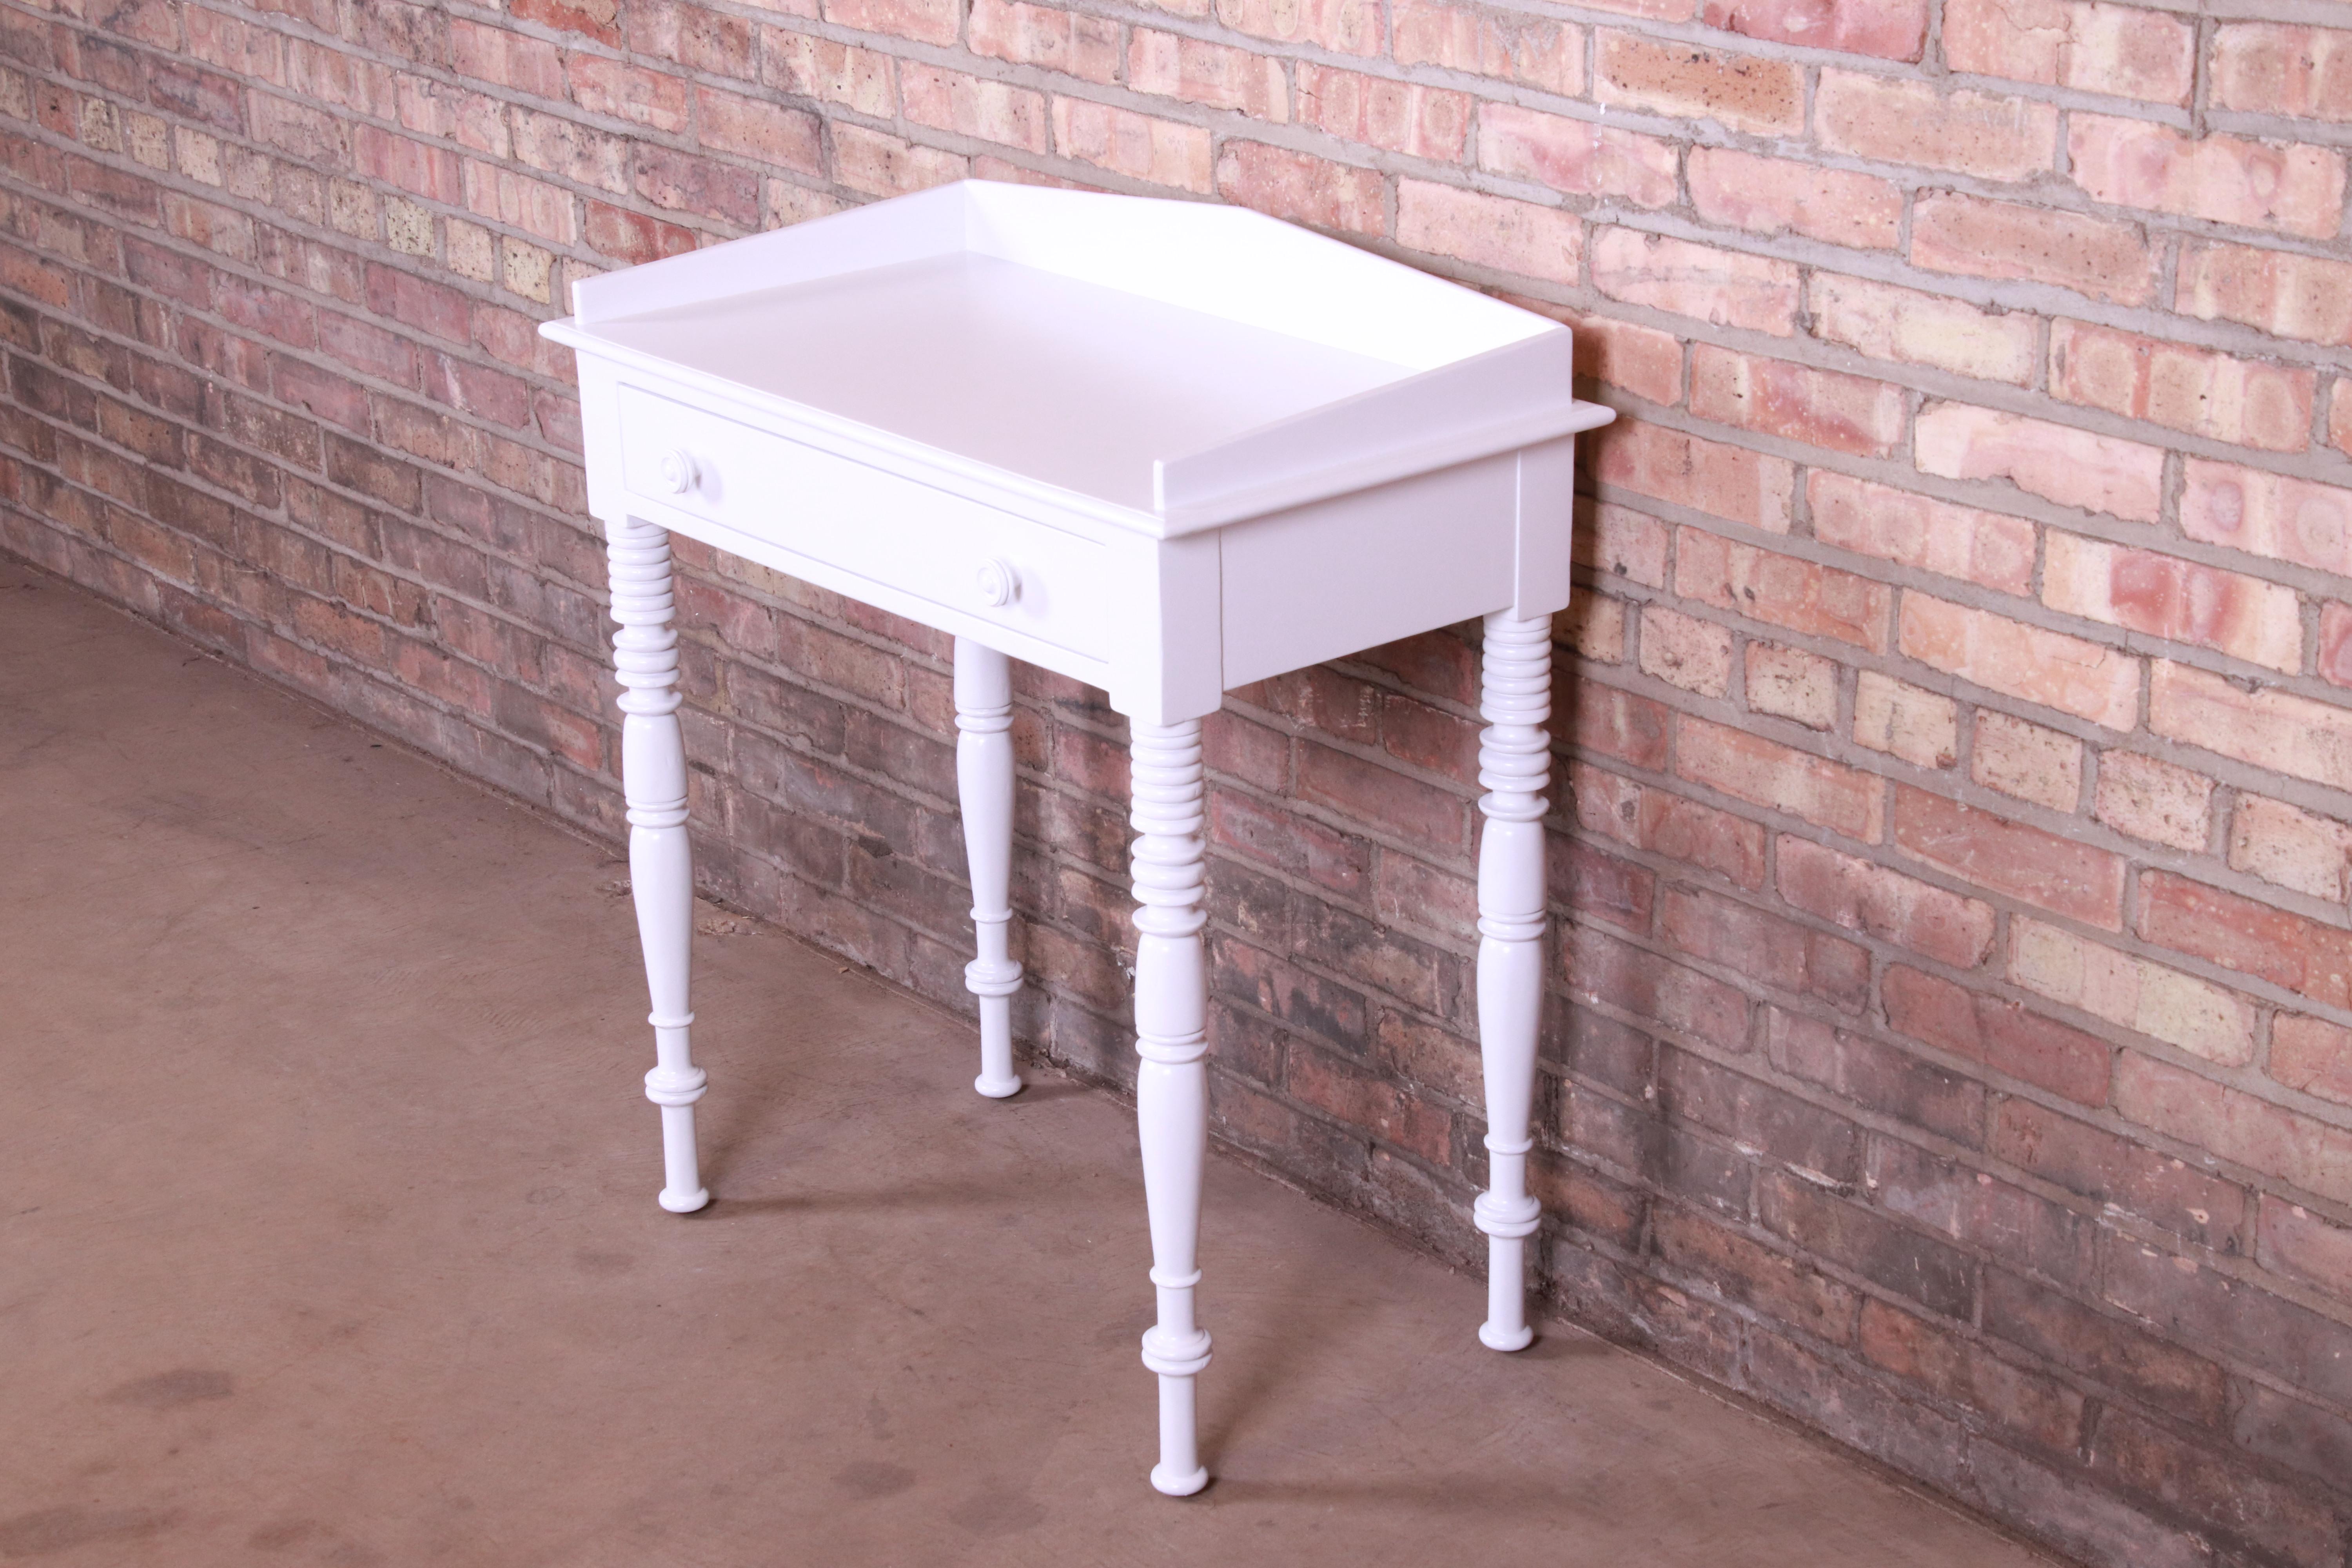 An exceptional small writing desk or entry table

By Baker Furniture Milling Road 